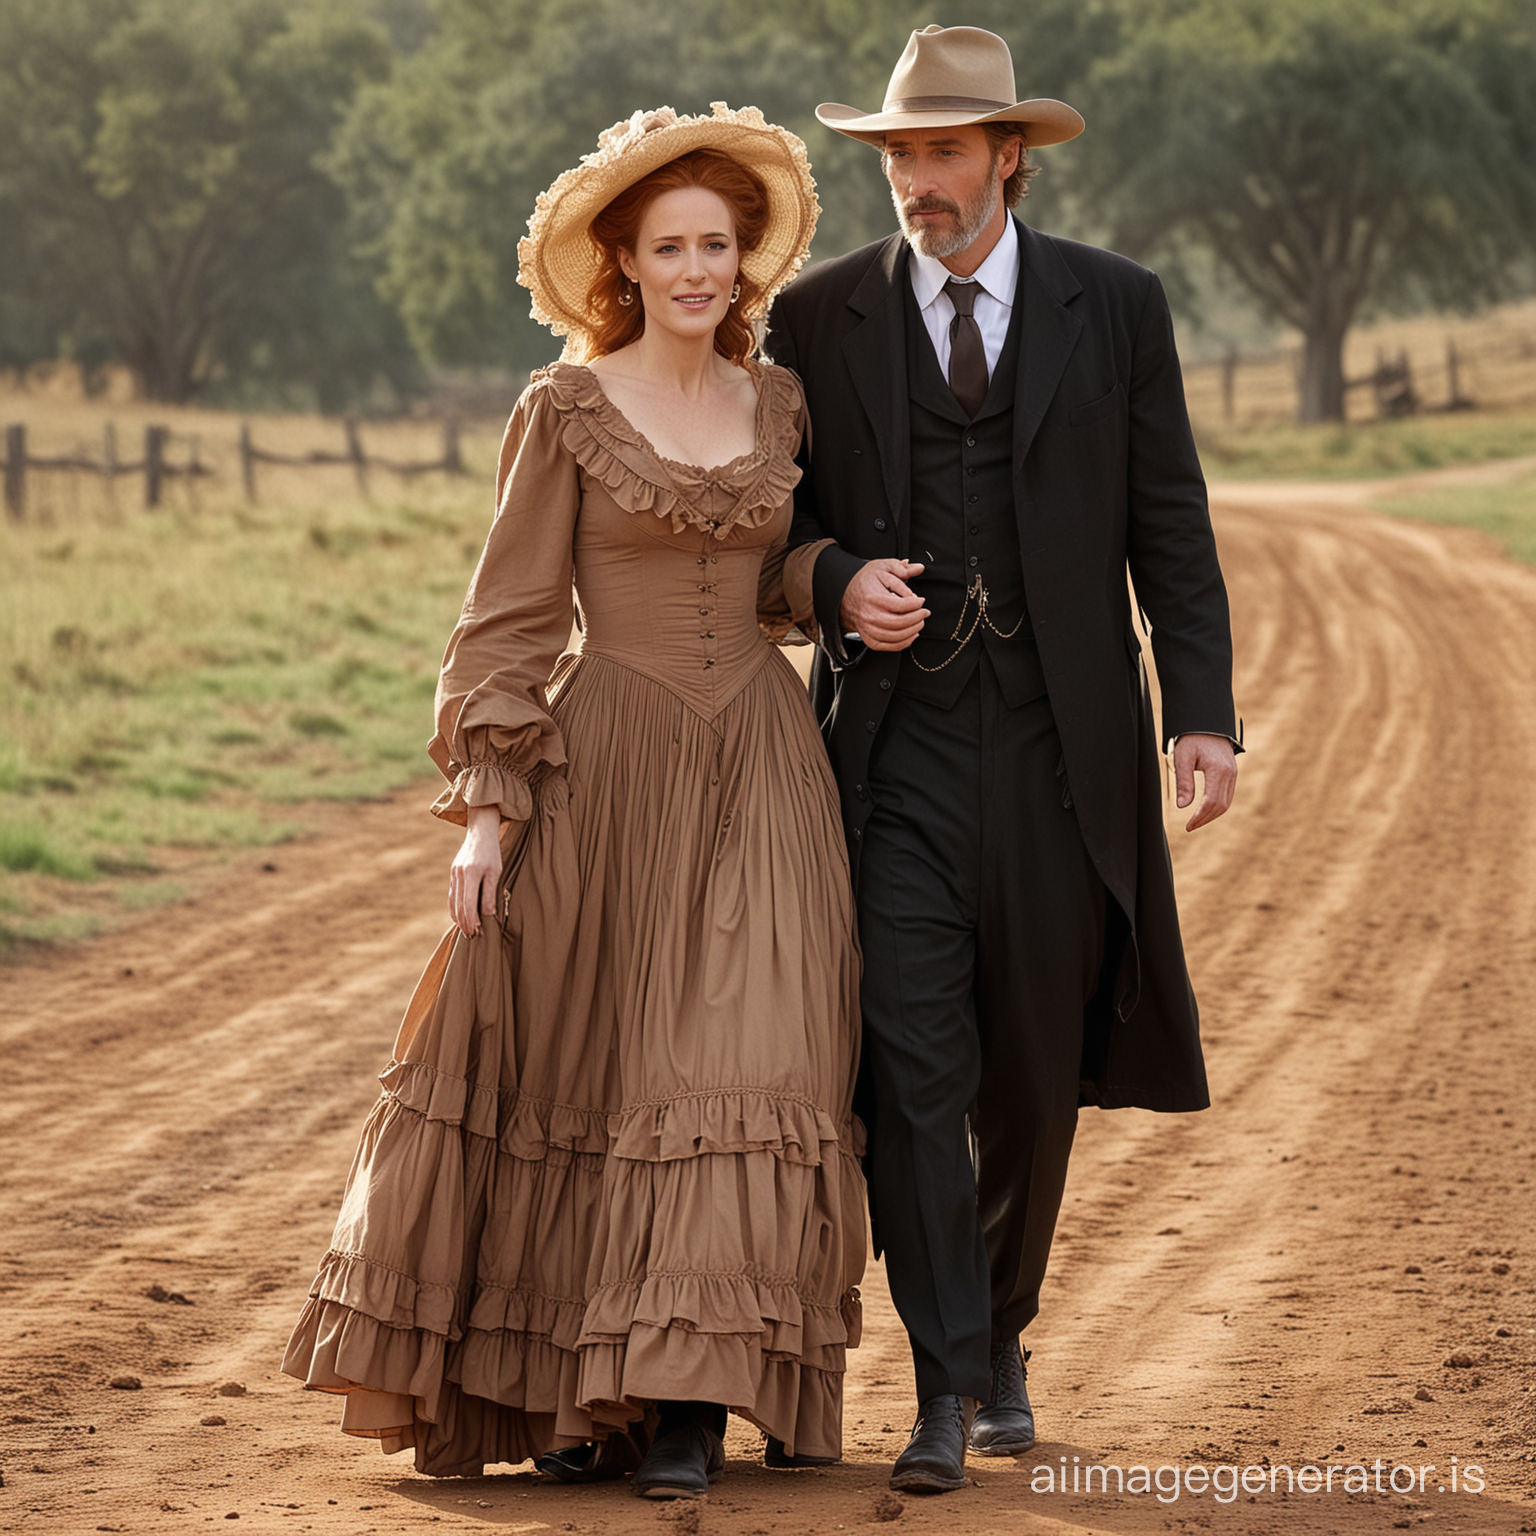 red haired Gillian Anderson dressed as an old west farmer's wife wearing a brown floor-length loose billowing old west poofy modest dress with layers upons layers of petticoats a long apron and a frilly bonnet hand in hand with an old farmer dressed into a black suit who seems to be her newlywed husband